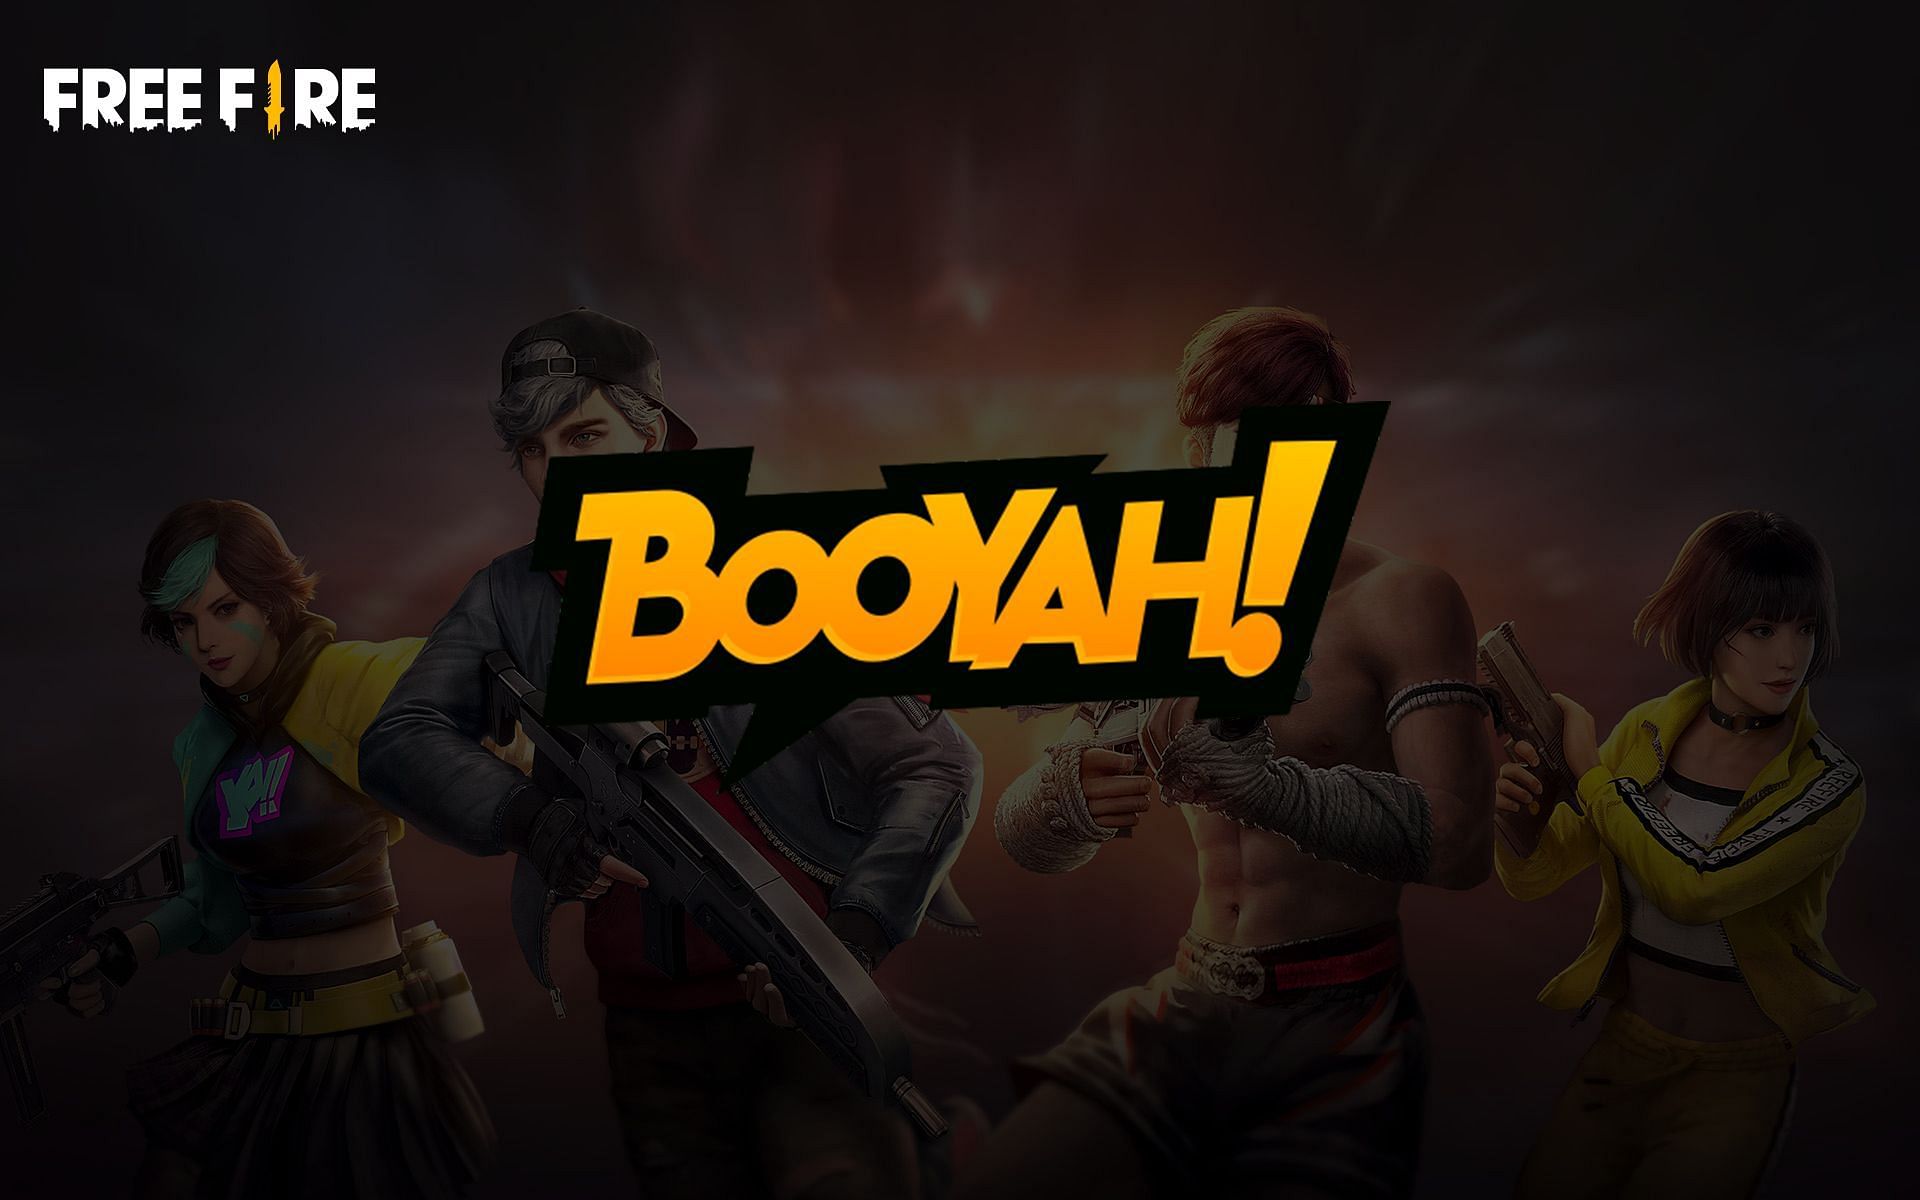 The latest Booyah! event is offering exciting in-game accessories for free (Image via Sportskeeda)